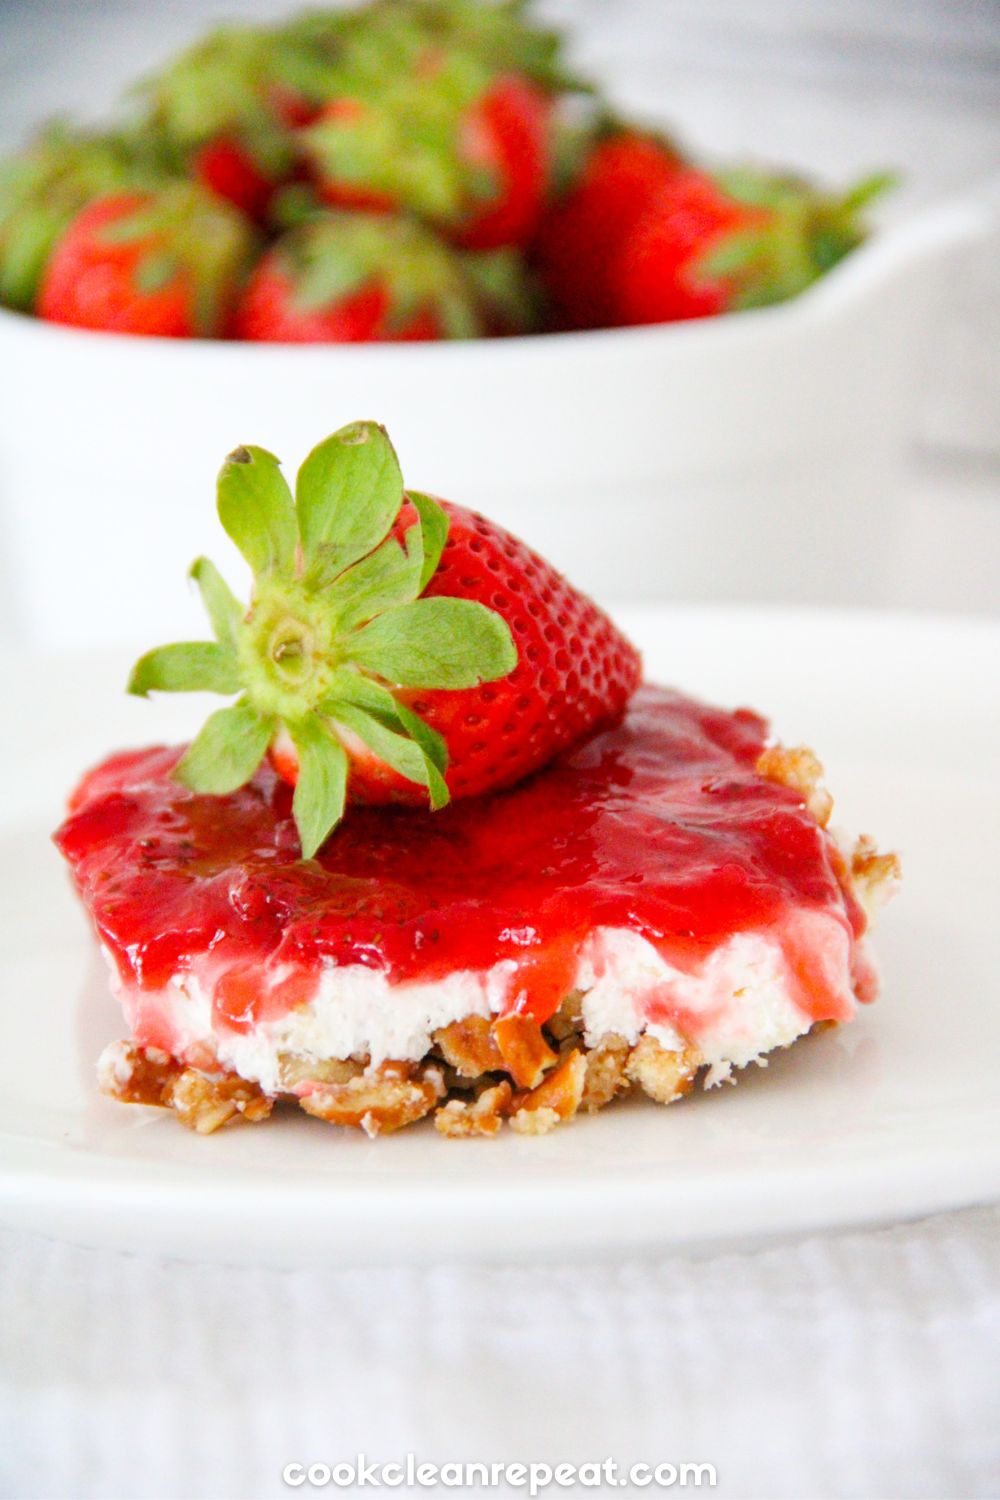 Strawberry Pretzel Salad slice served on a plate with bowl of strawberries in the background